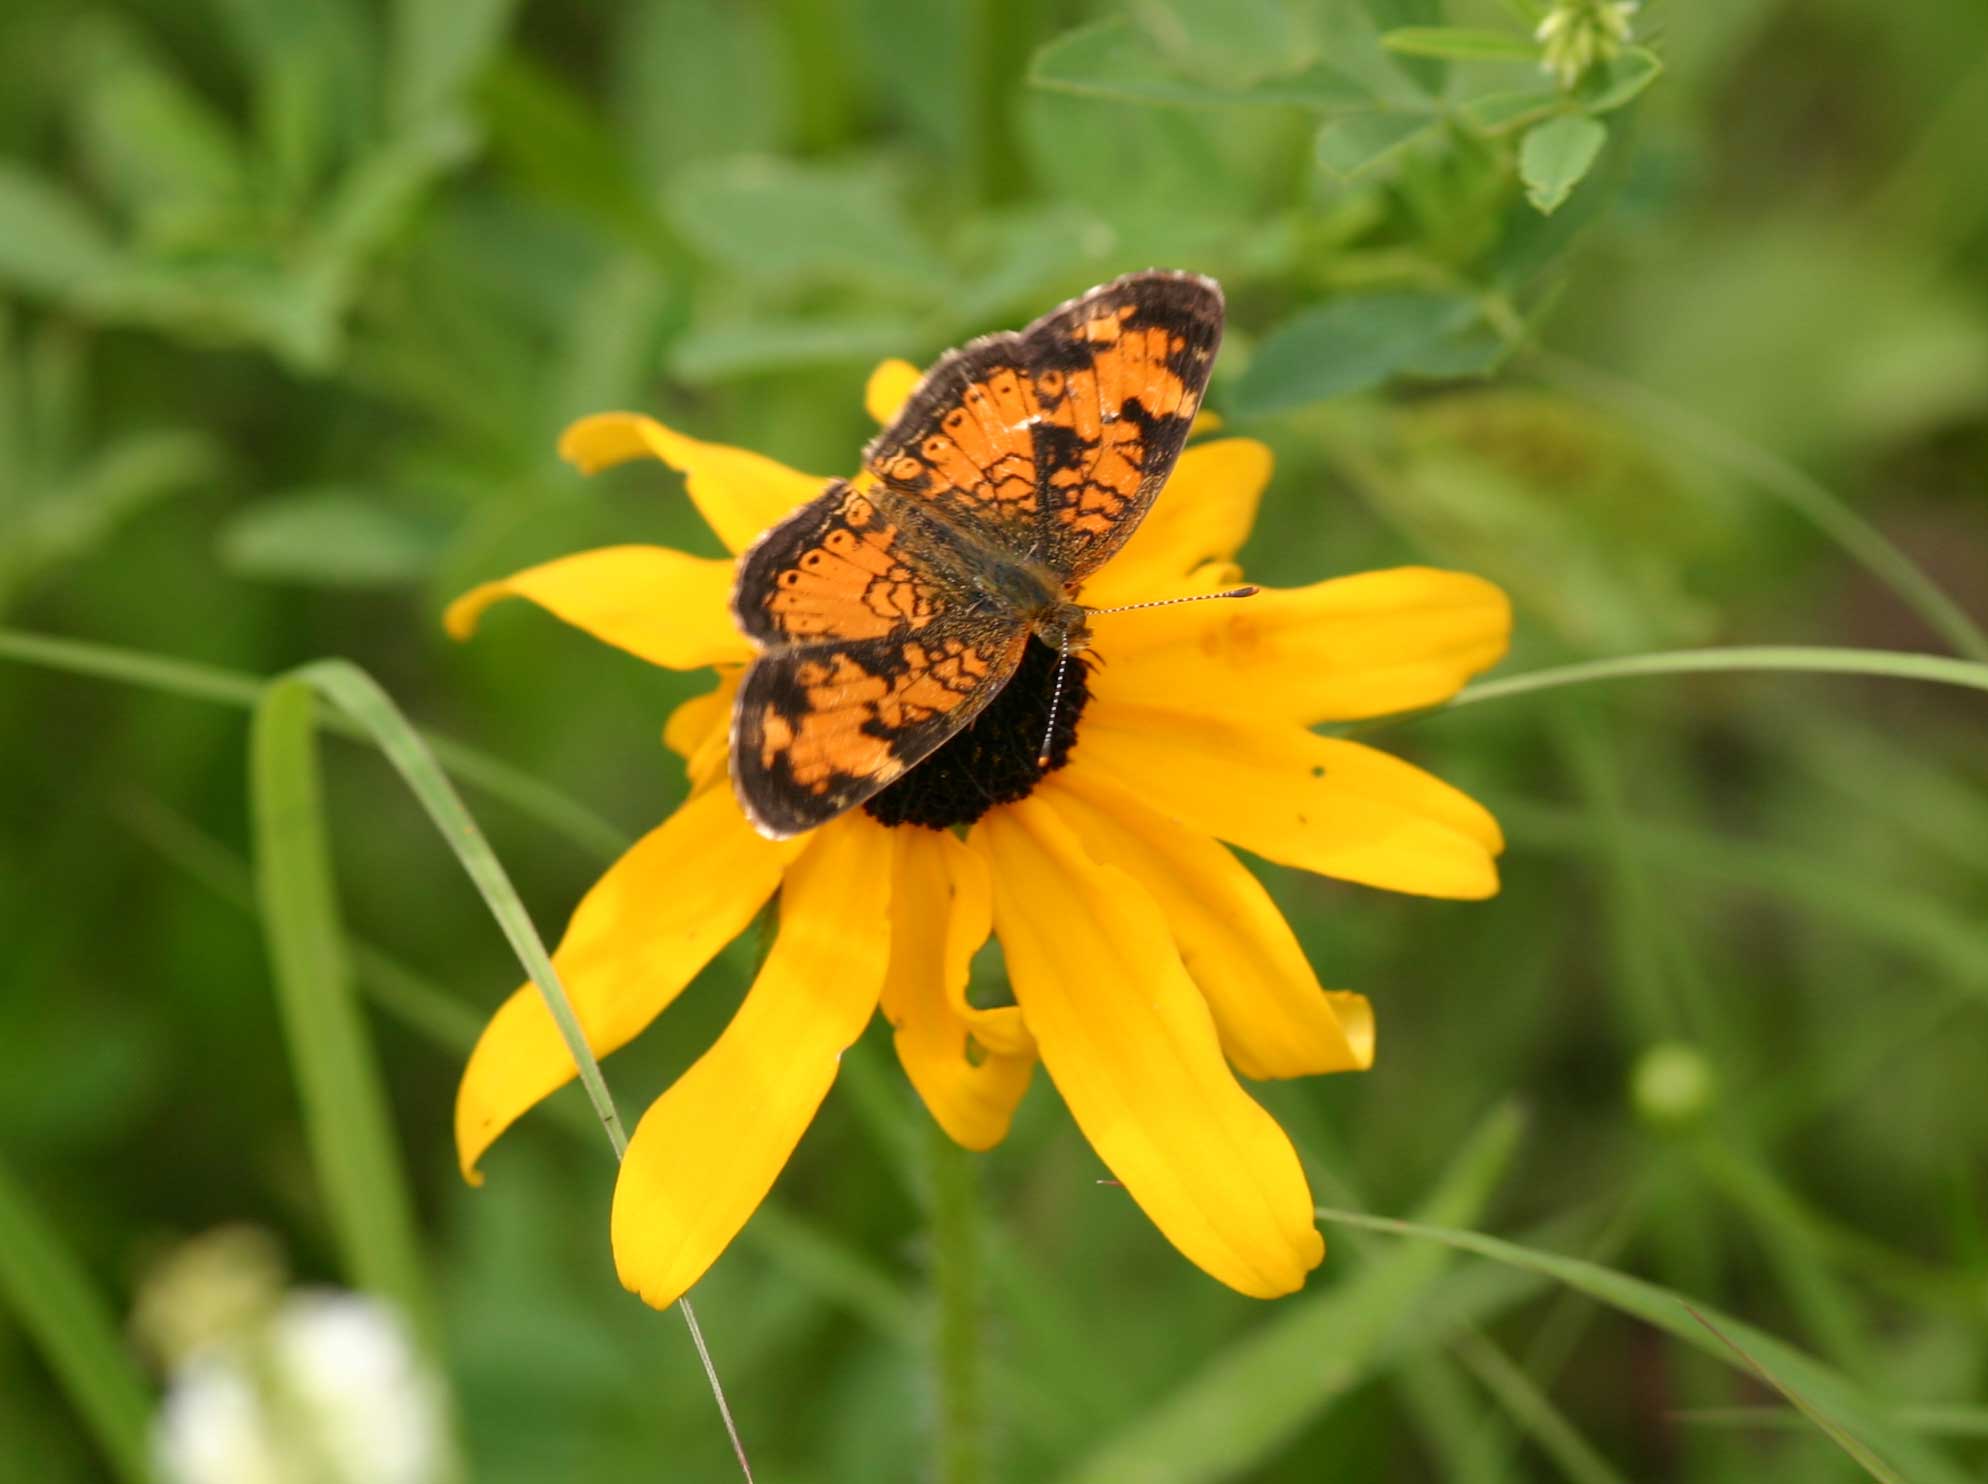 An orange butterfly with dark markings on its wings, perched on a flower with long yellow petals.